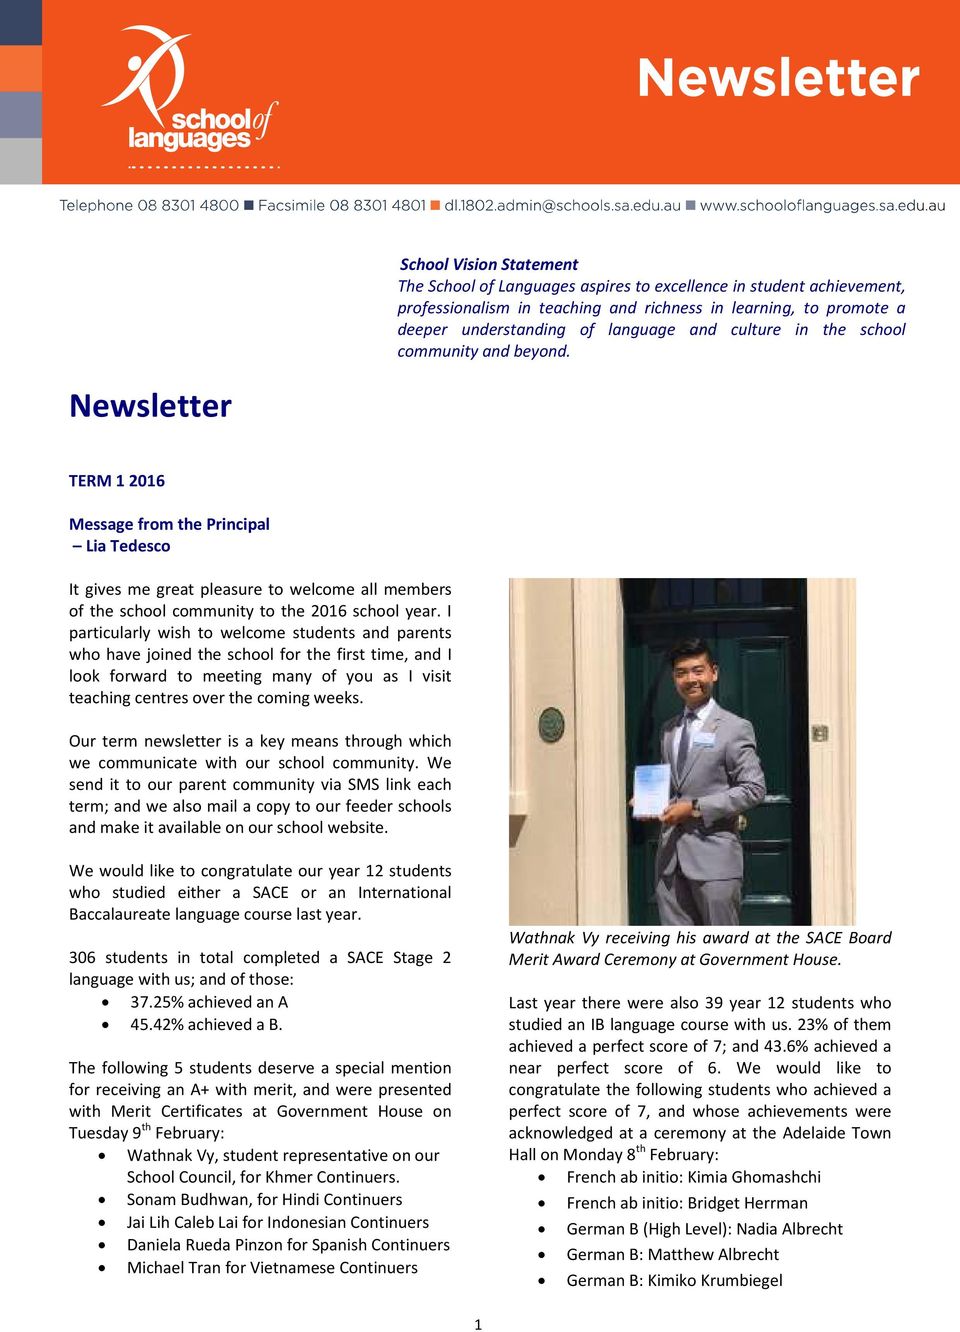 Newsletter TERM 1 2016 Message from the Principal Lia Tedesco It gives me great pleasure to welcome all members of the school community to the 2016 school year.